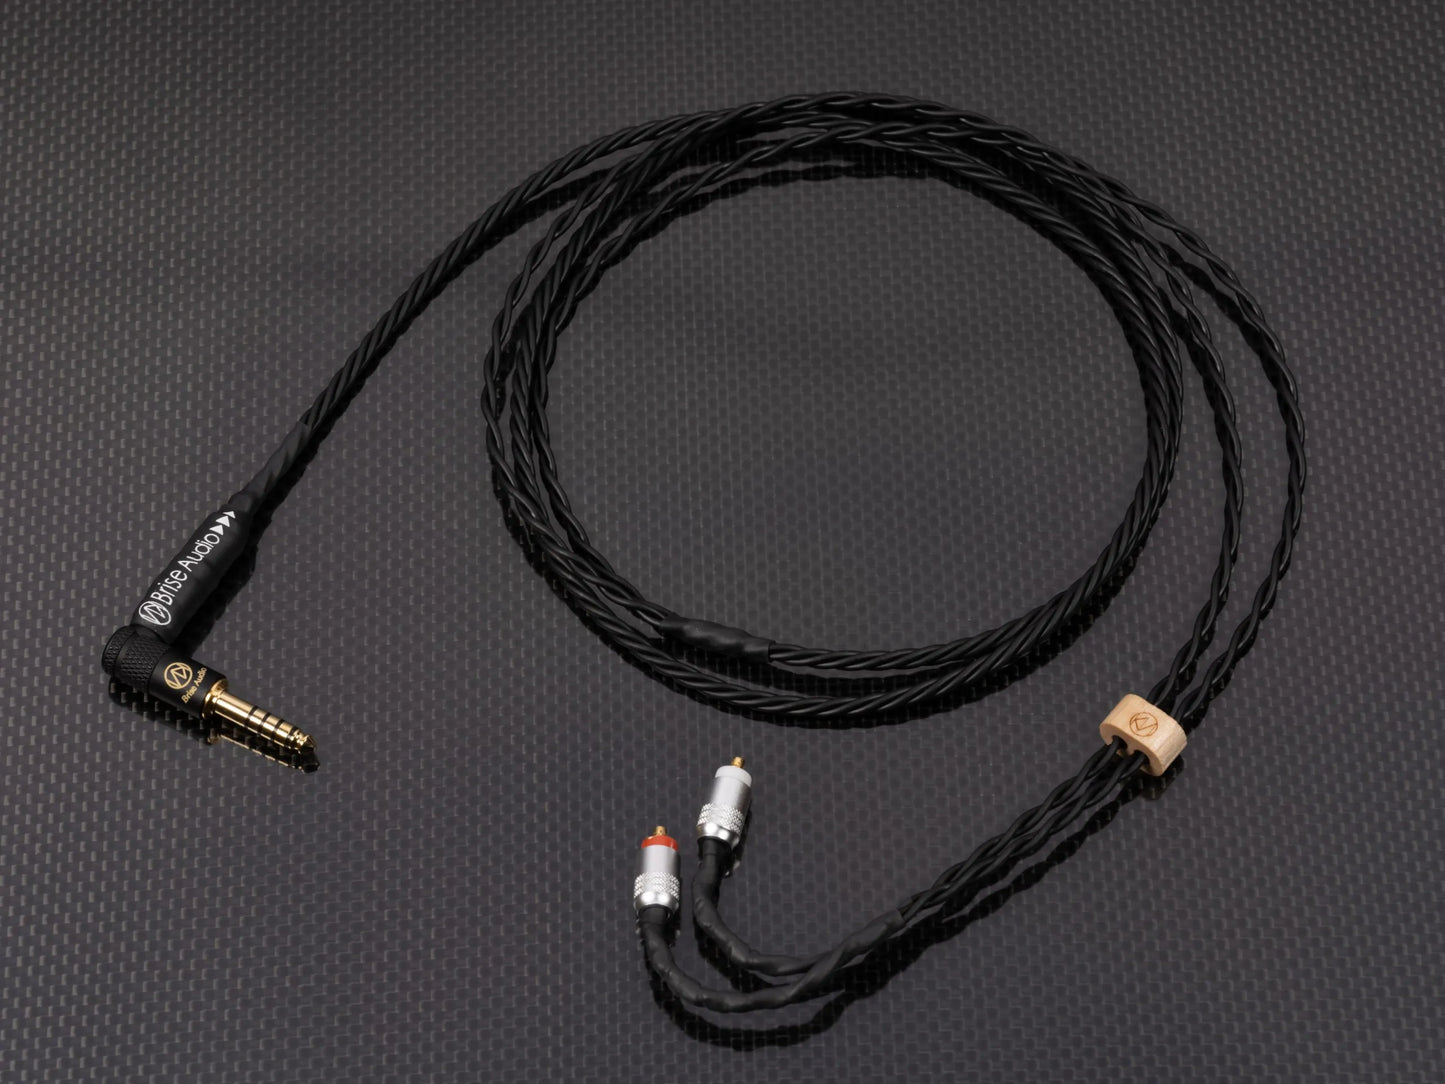 Brise Audio BSEP Cable for SONY IER-Z1R IEM Earphone 4.4mm Plug MMCX connector Made In Japan